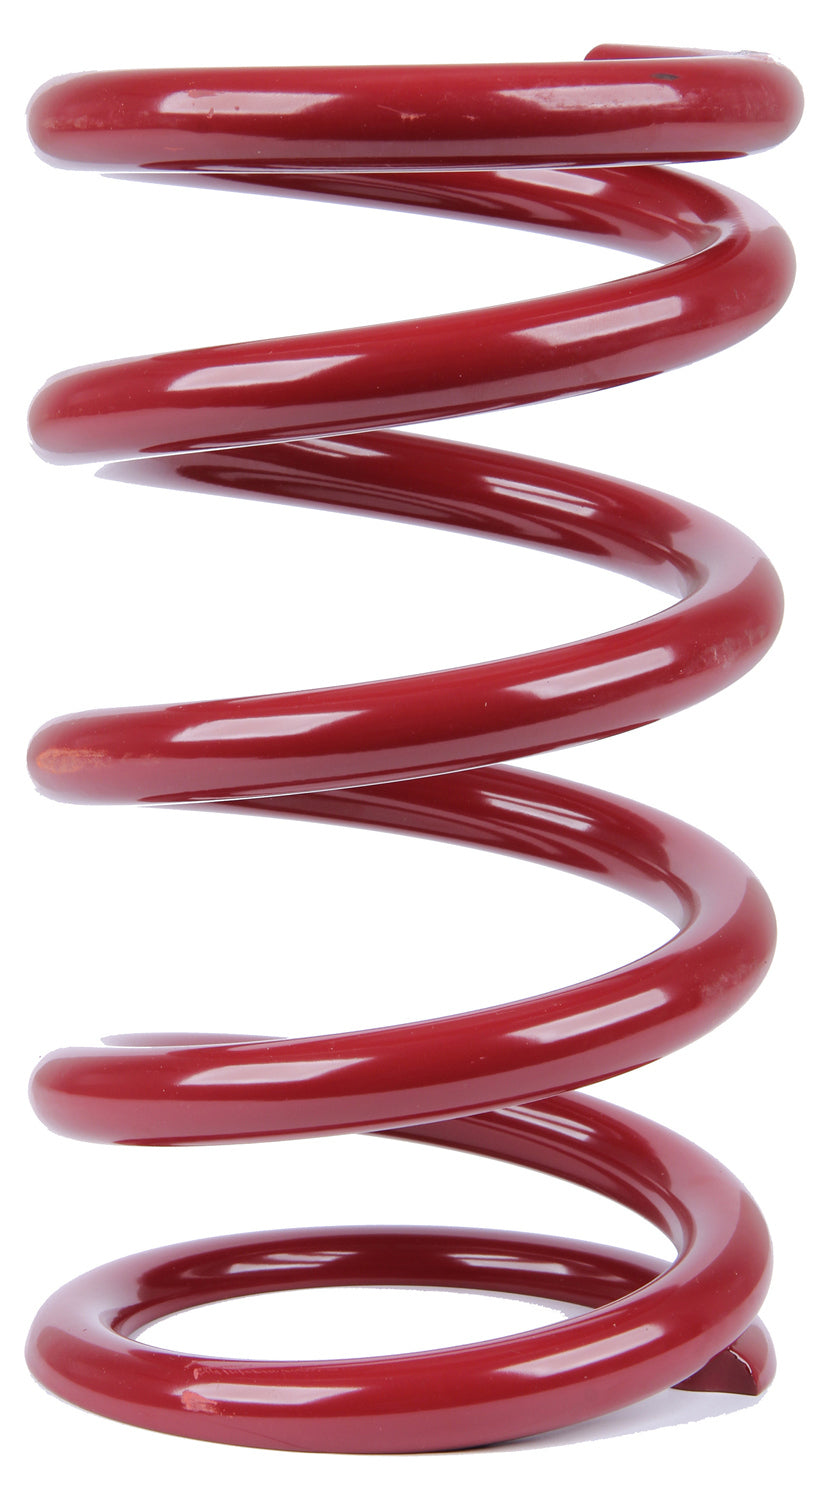 Coil Spring - Coil-Over - 5.5 in OD - 9.5 in Length - 1000 lb/in Spring Rate - Front - Steel - Red Powder Coat - Each